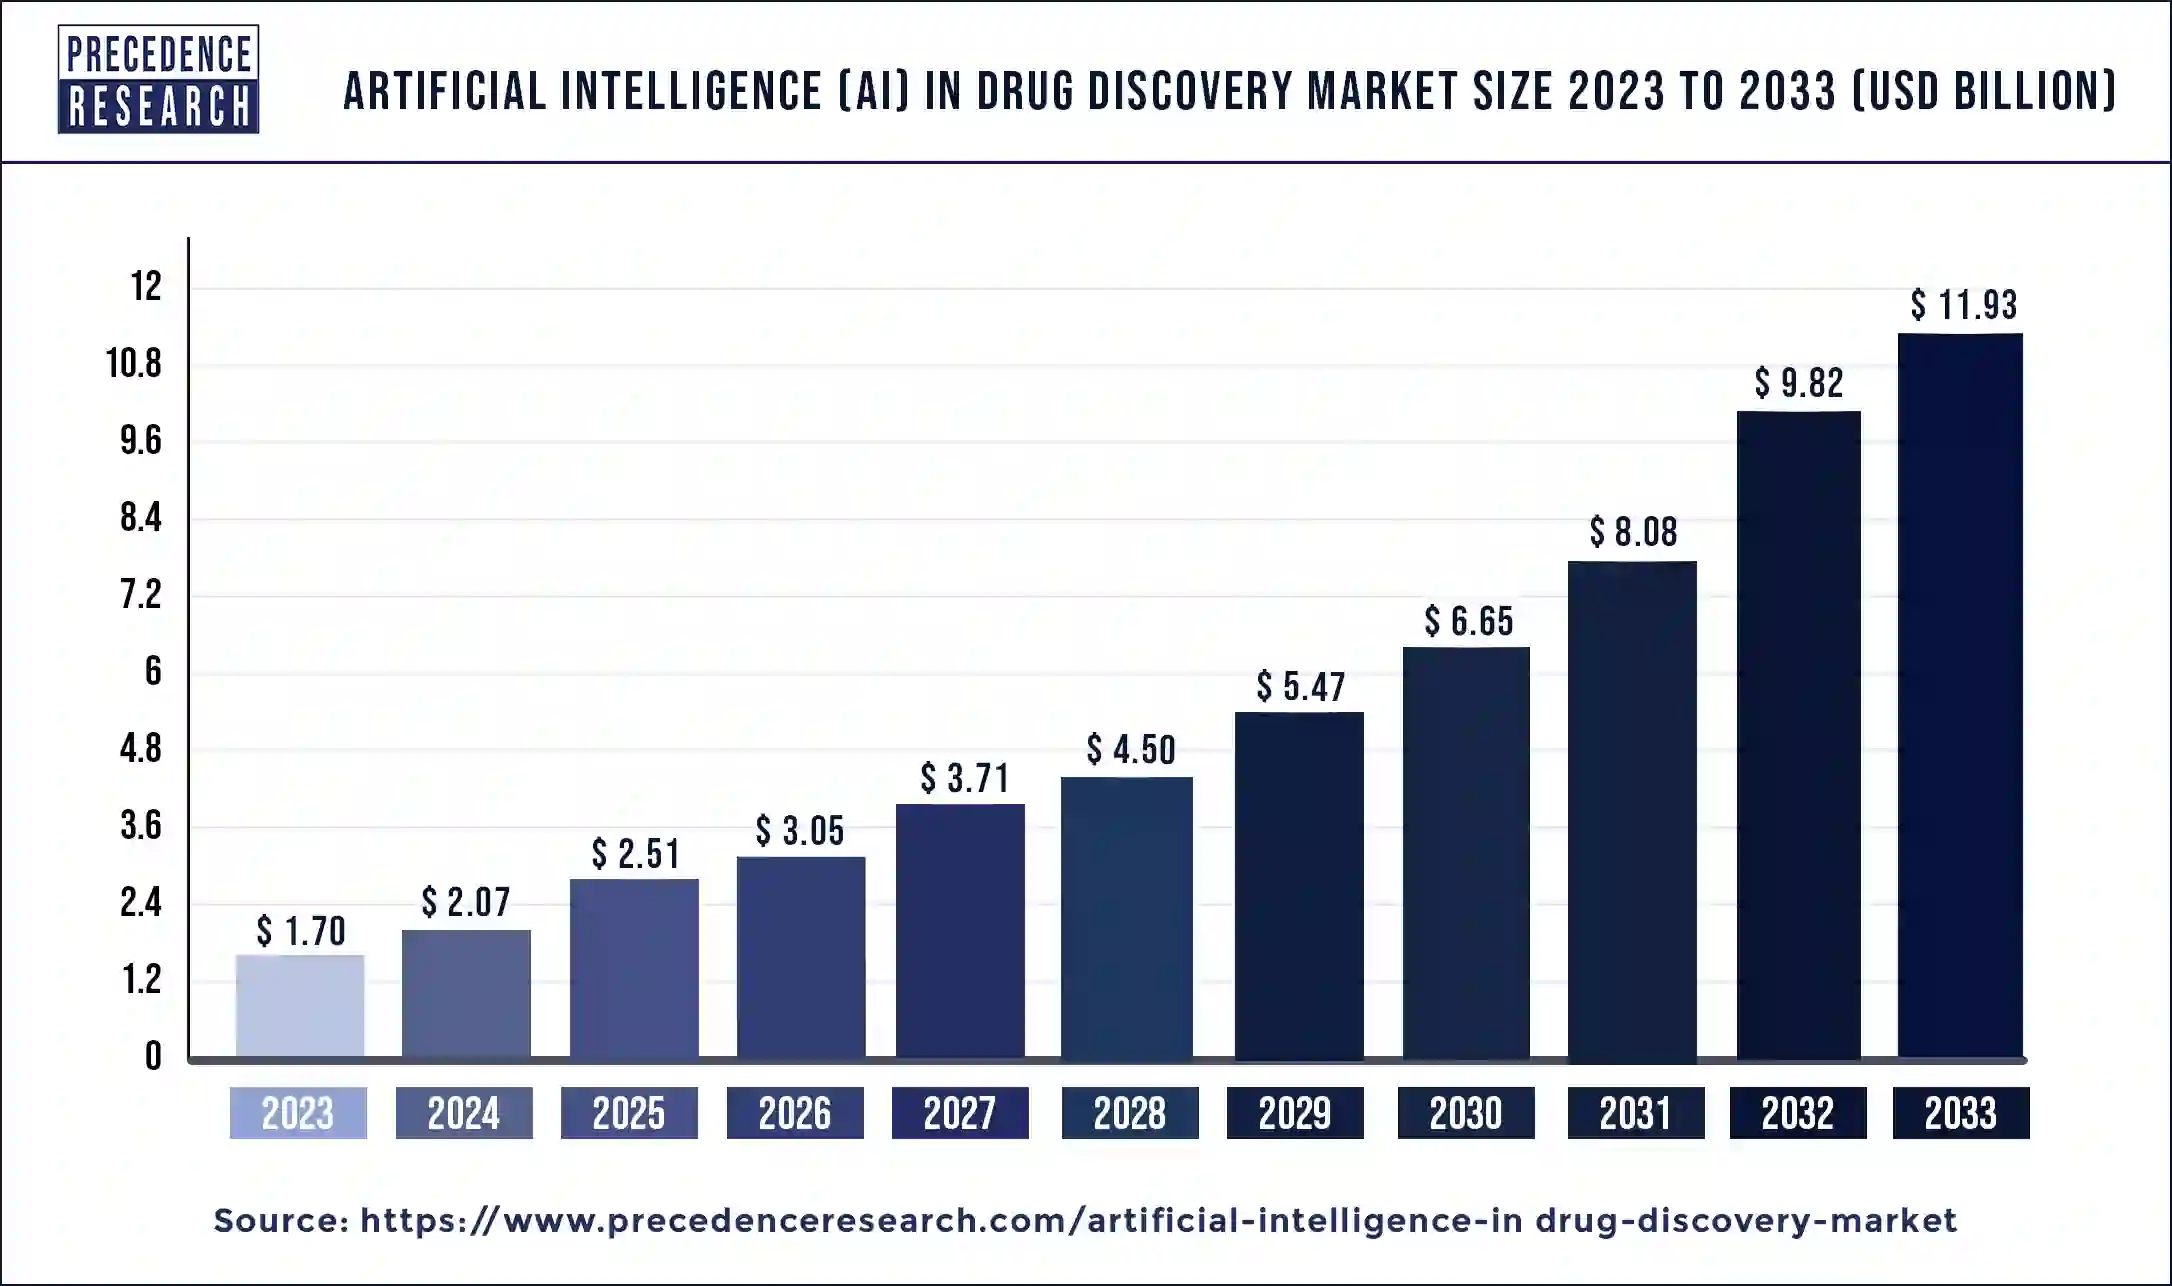 Artificial Intelligence In Drug Discovery Market Size 2024 to 2033